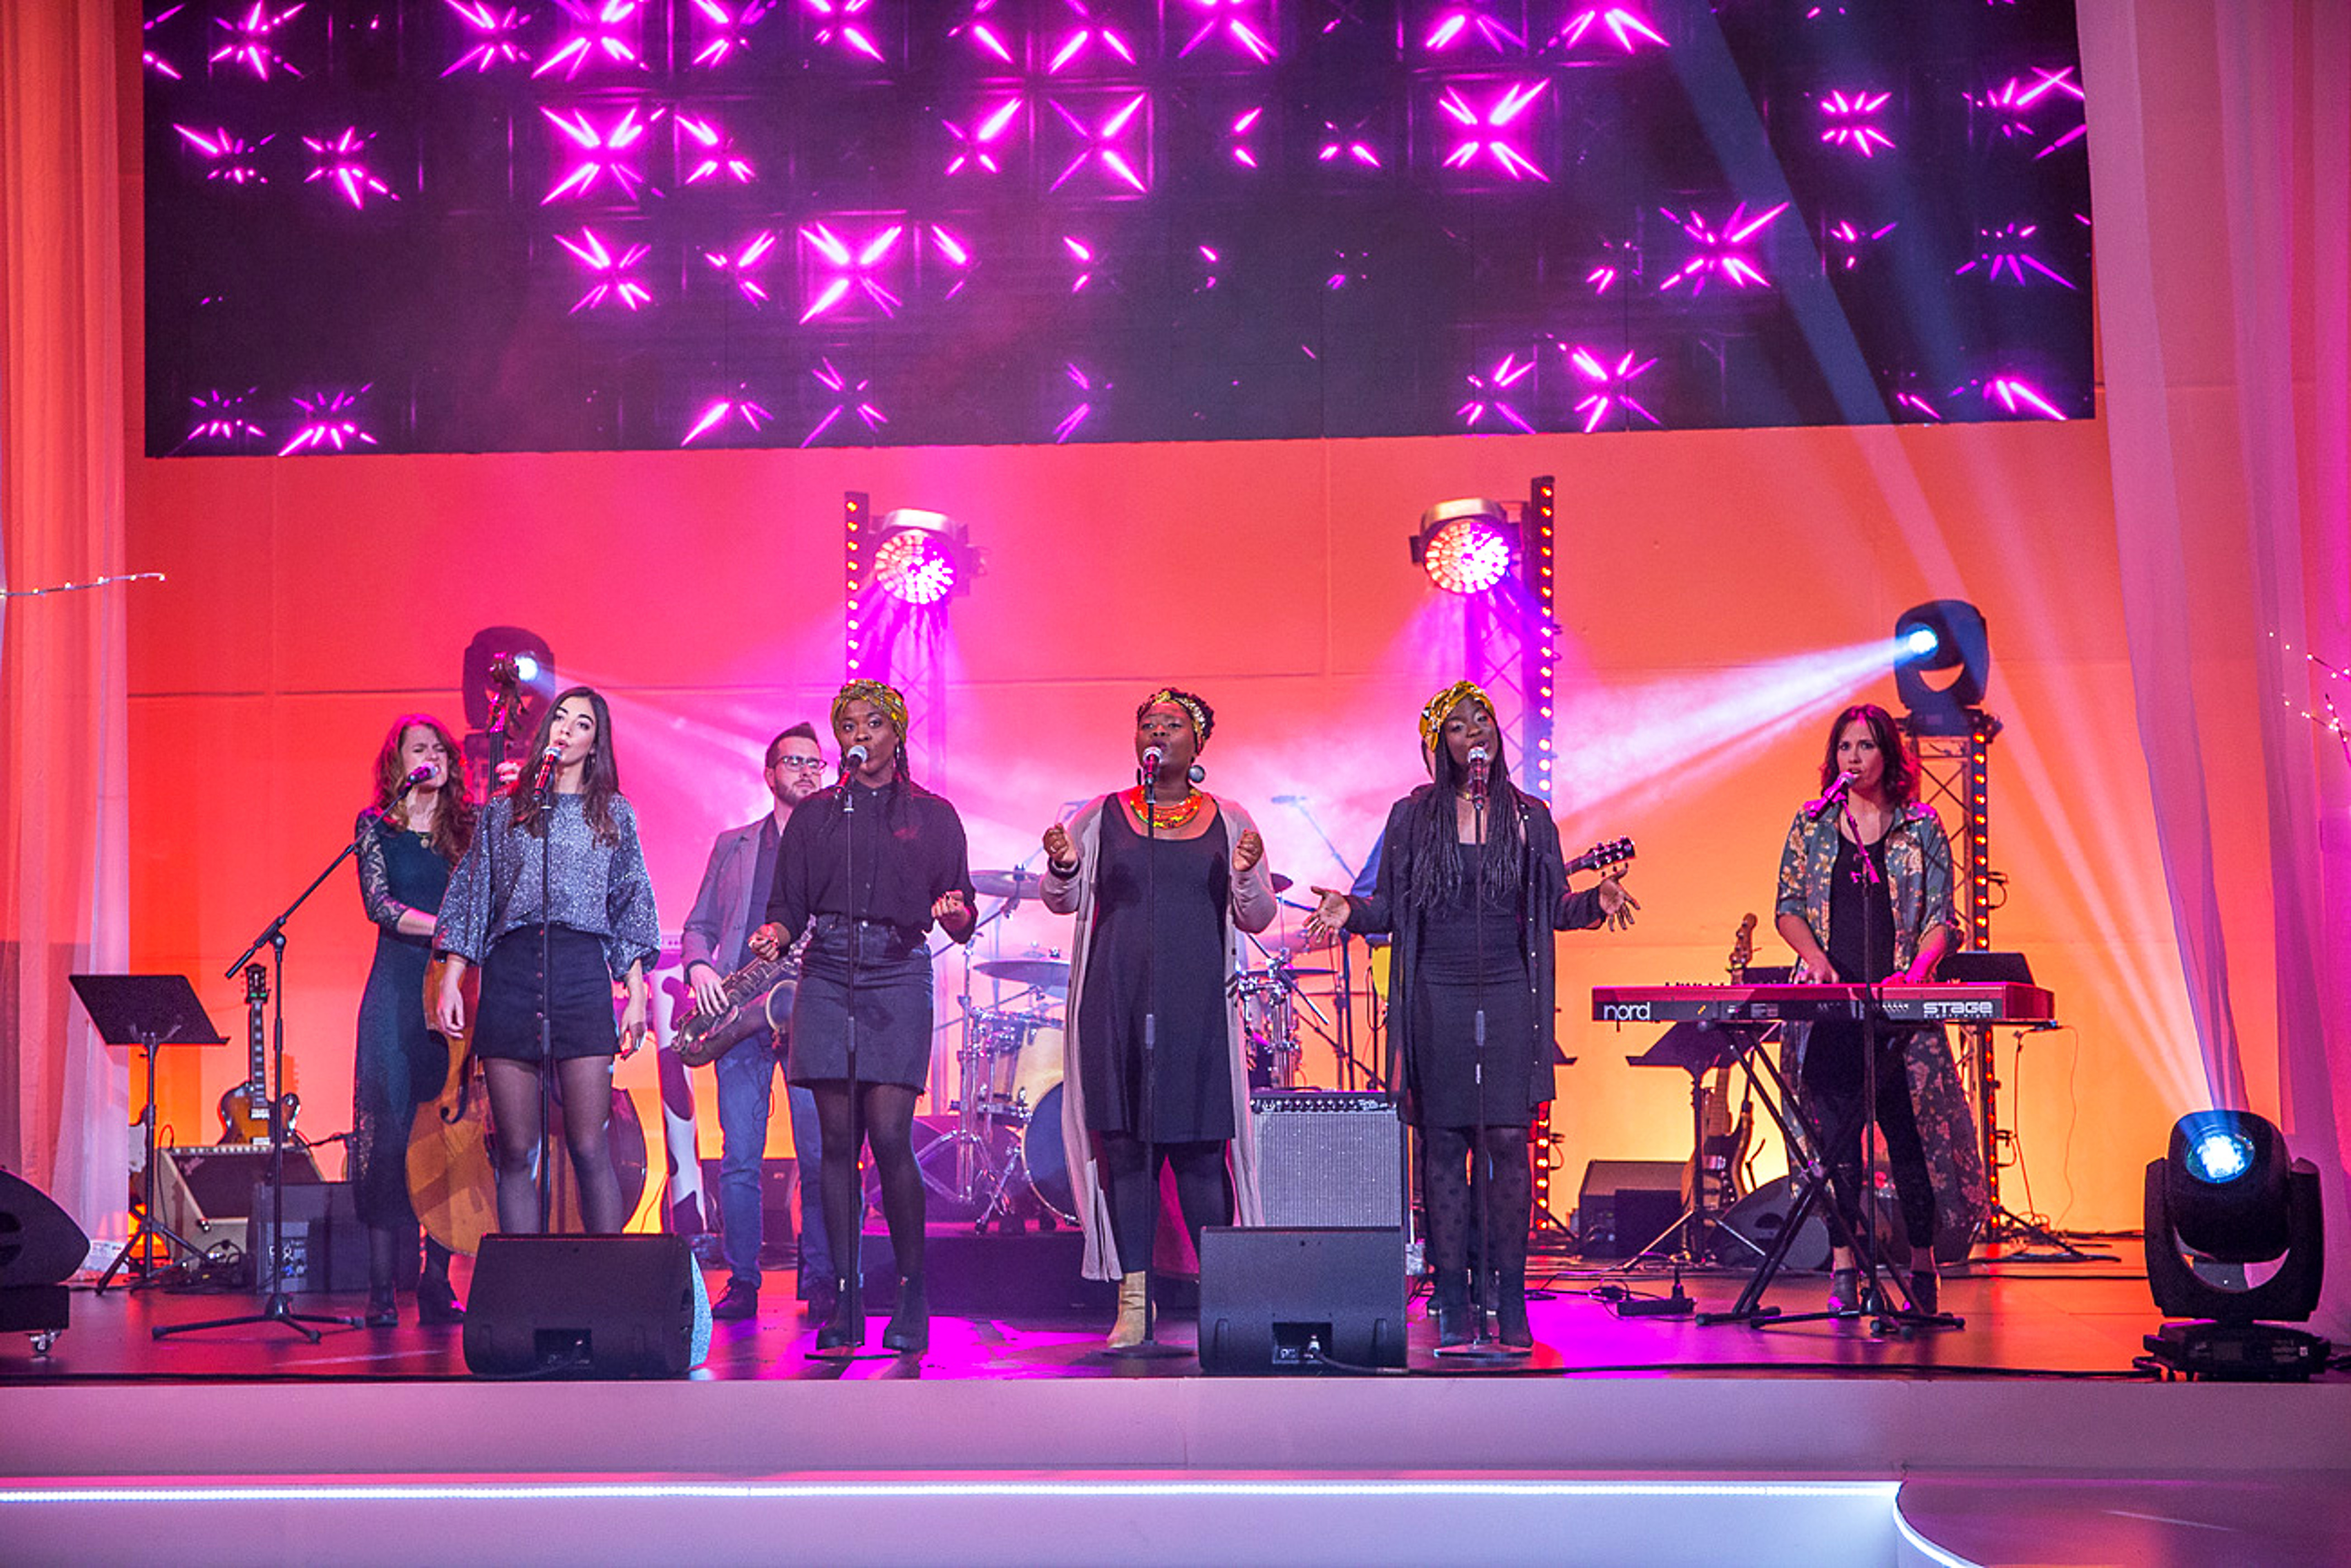 Sara Terraza, Wom, and Funkystep & The Sey Sisters sing the song 'Els rius del món' at the TV3 studio for the station's telethon (by TV3)